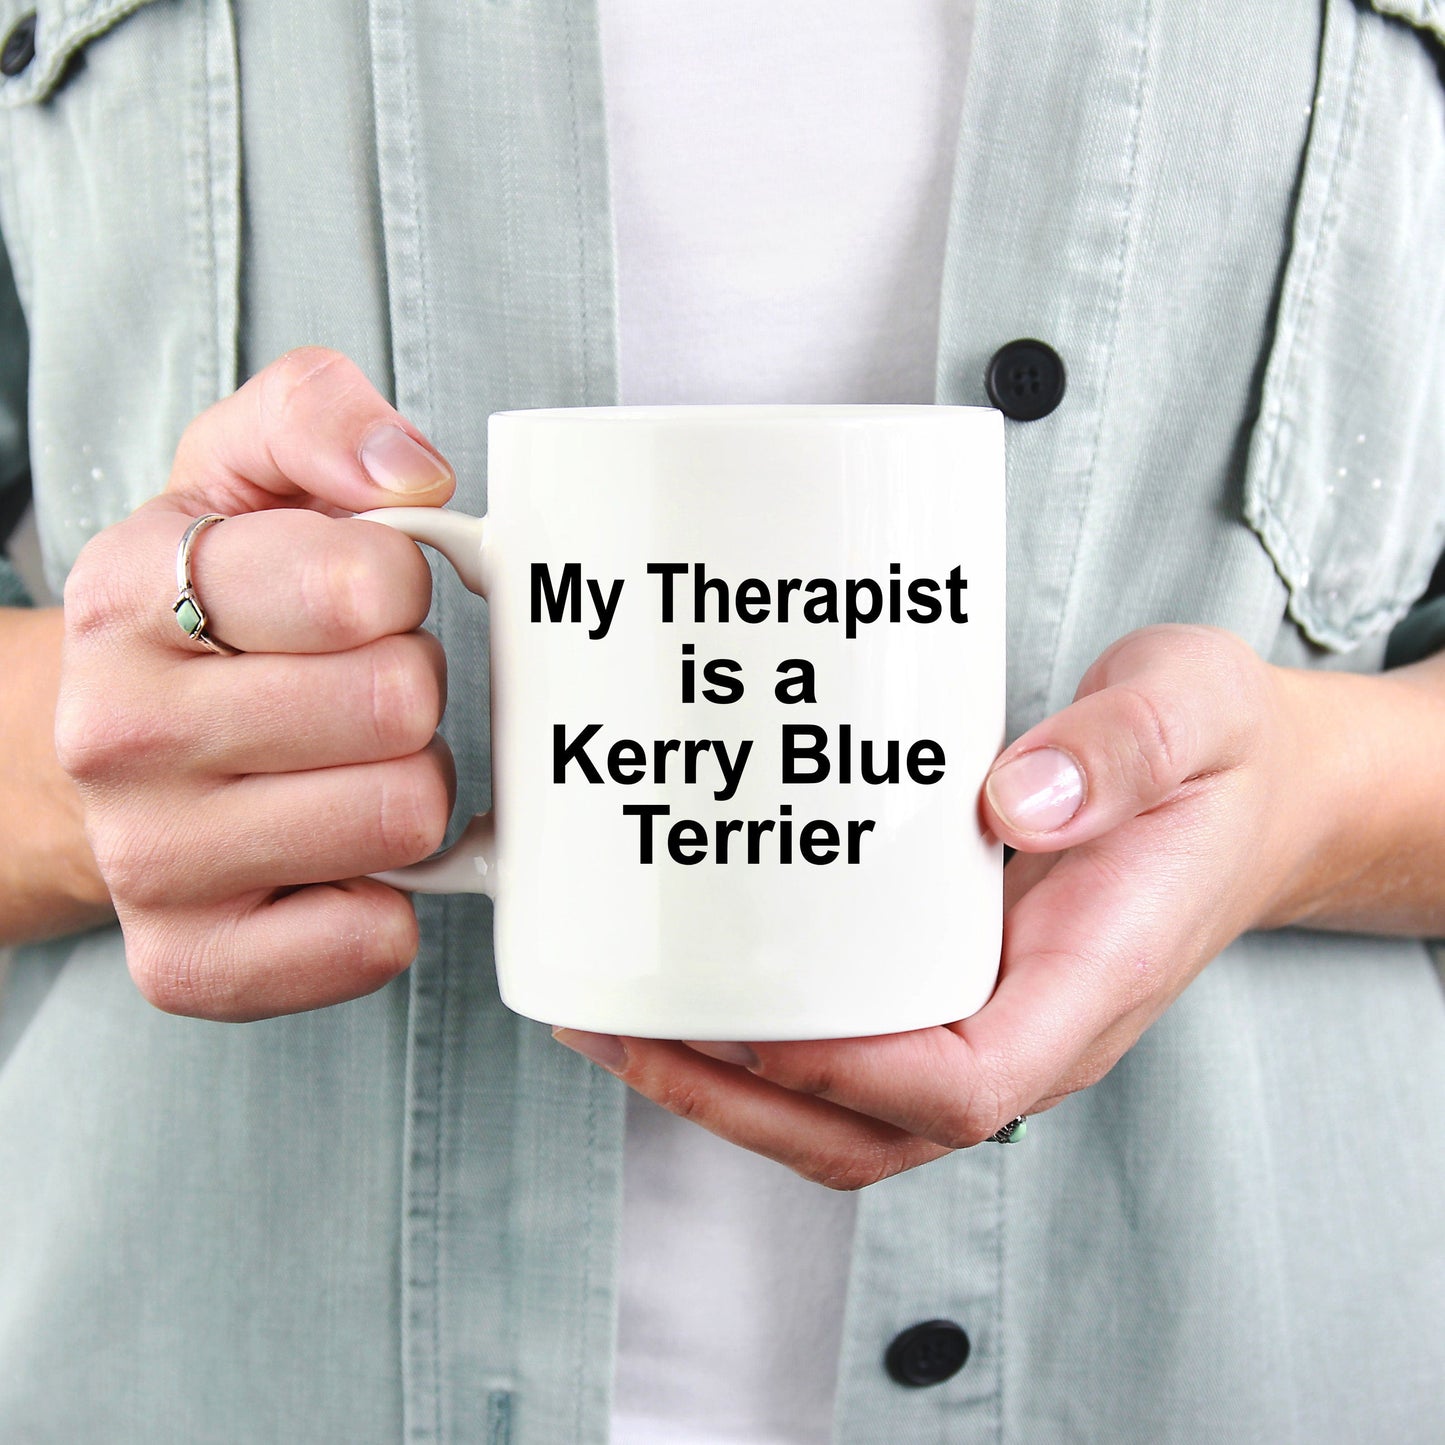 Kerry Blue Terrier Dog Owner Lover Funny Gift Therapist White Ceramic Coffee Mug